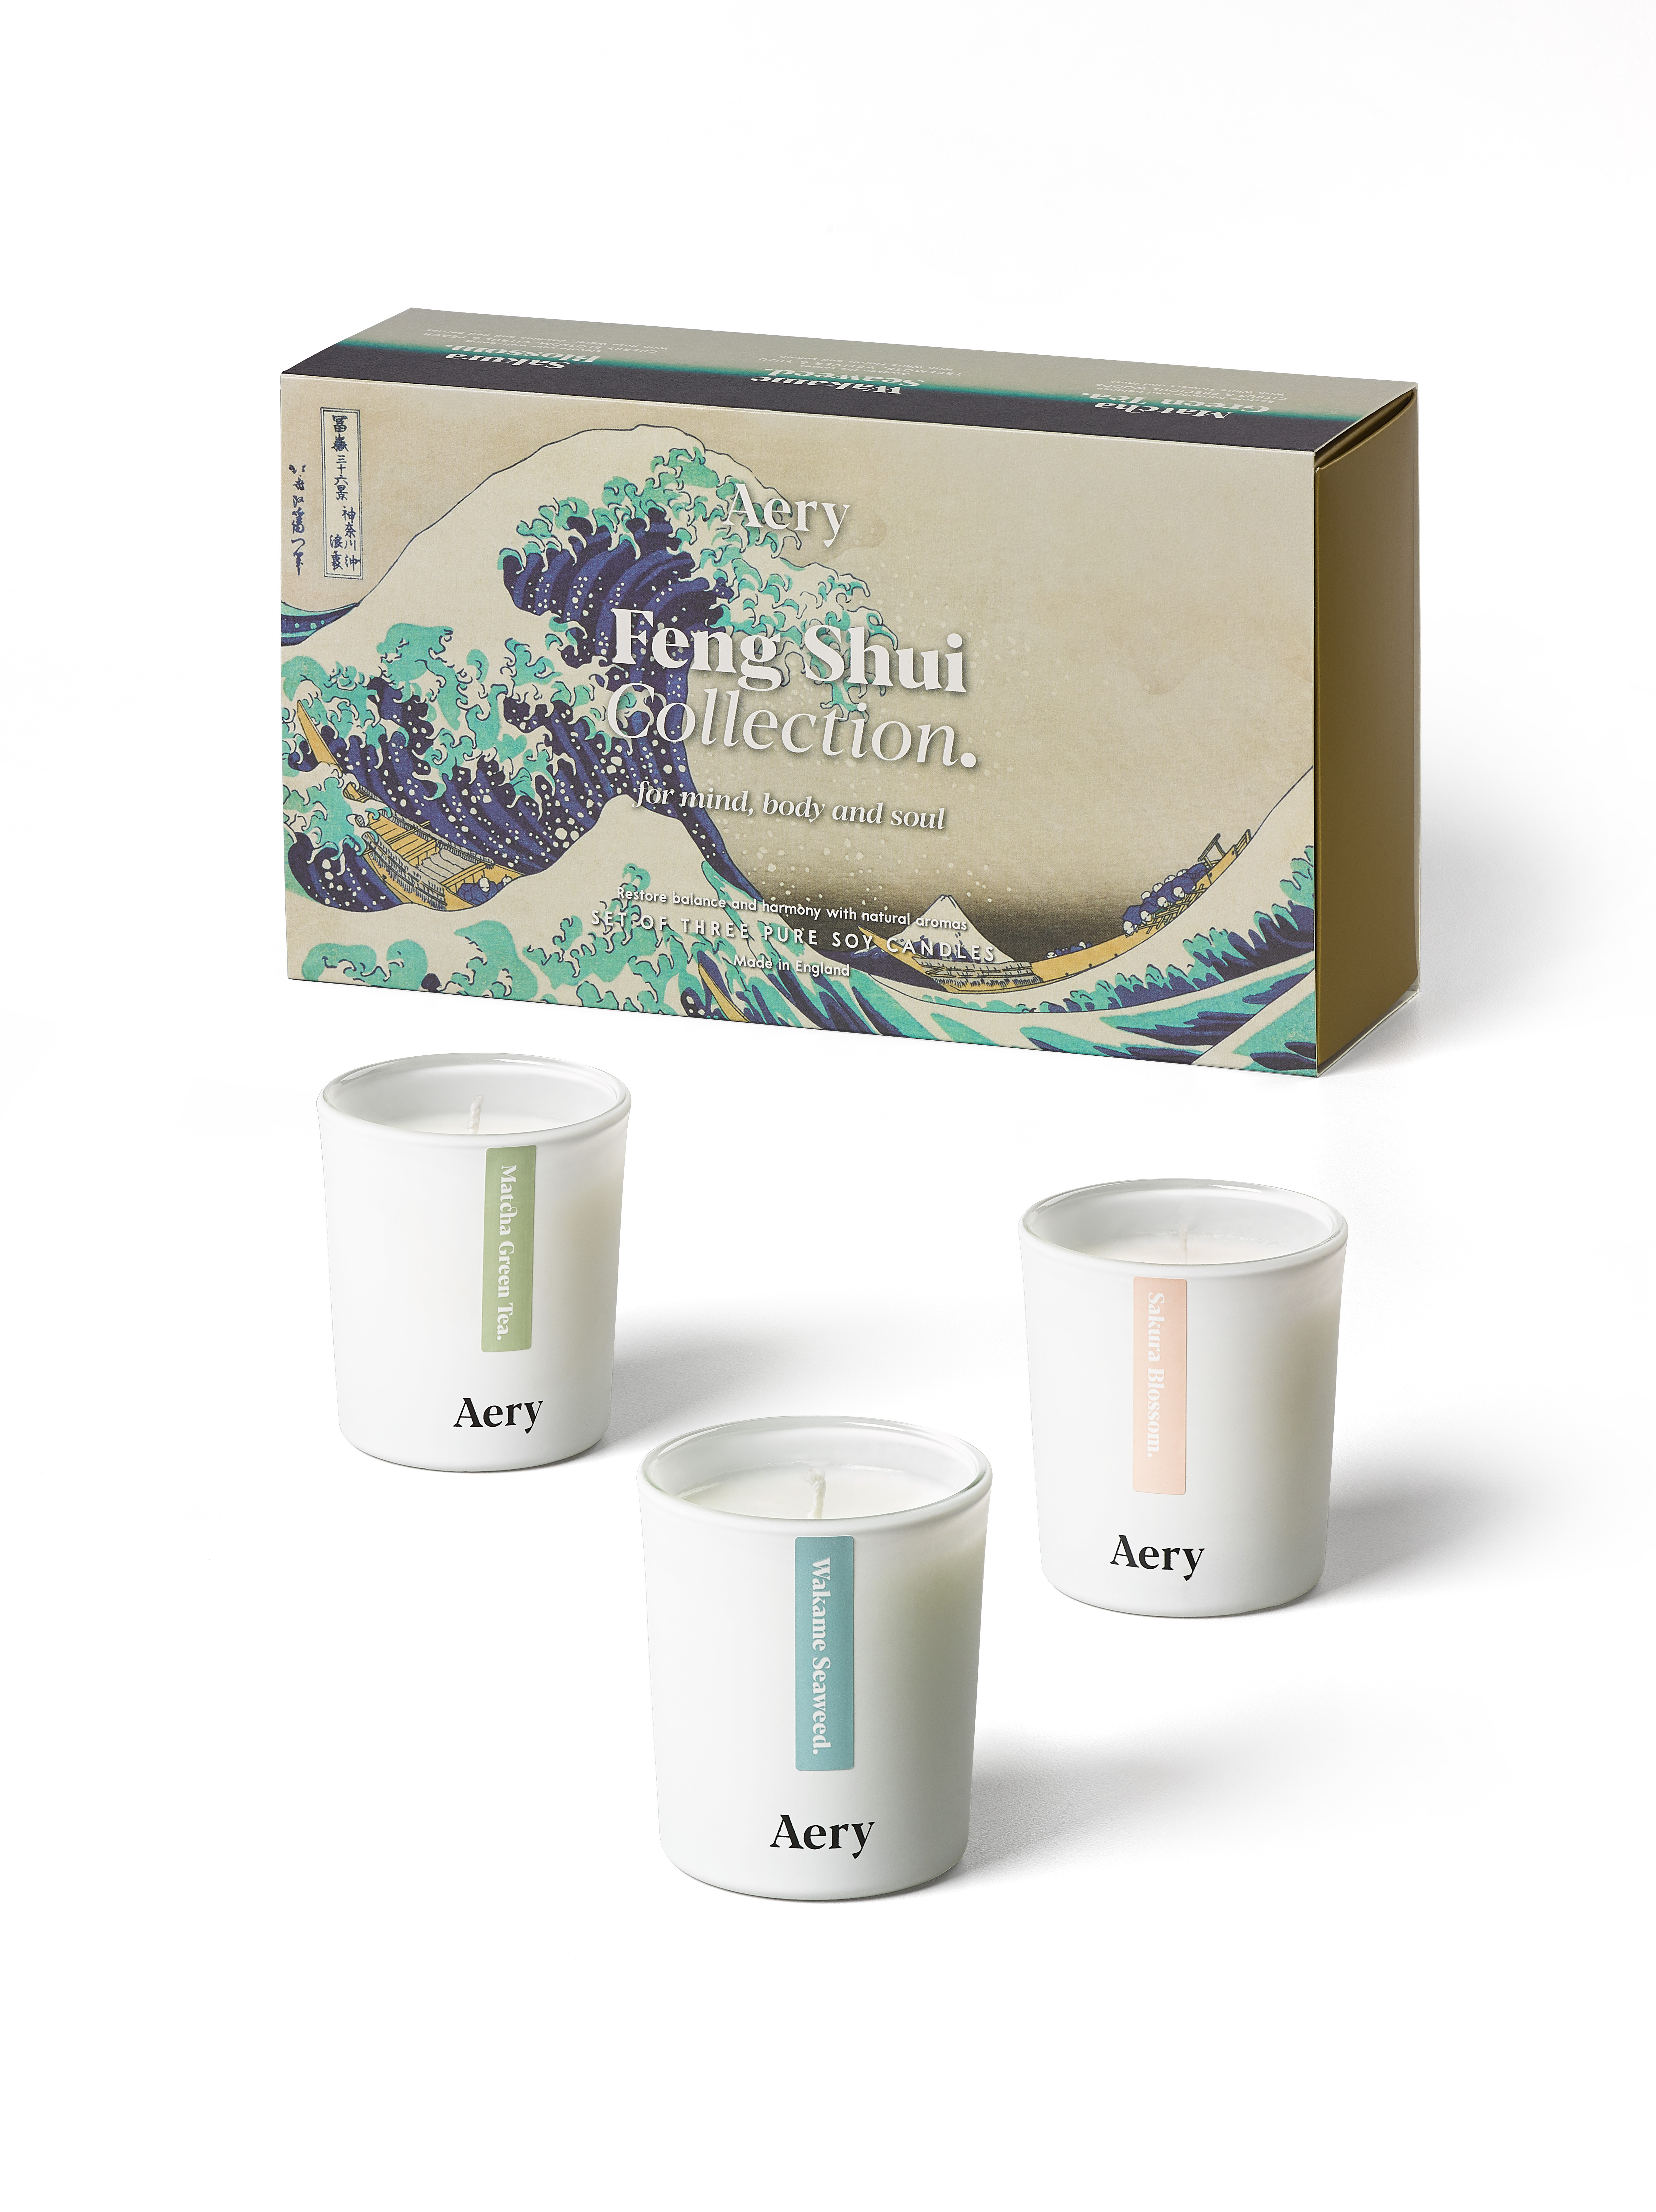 Aery Feng Shui Set of 3 Votive Candles Gift Collection